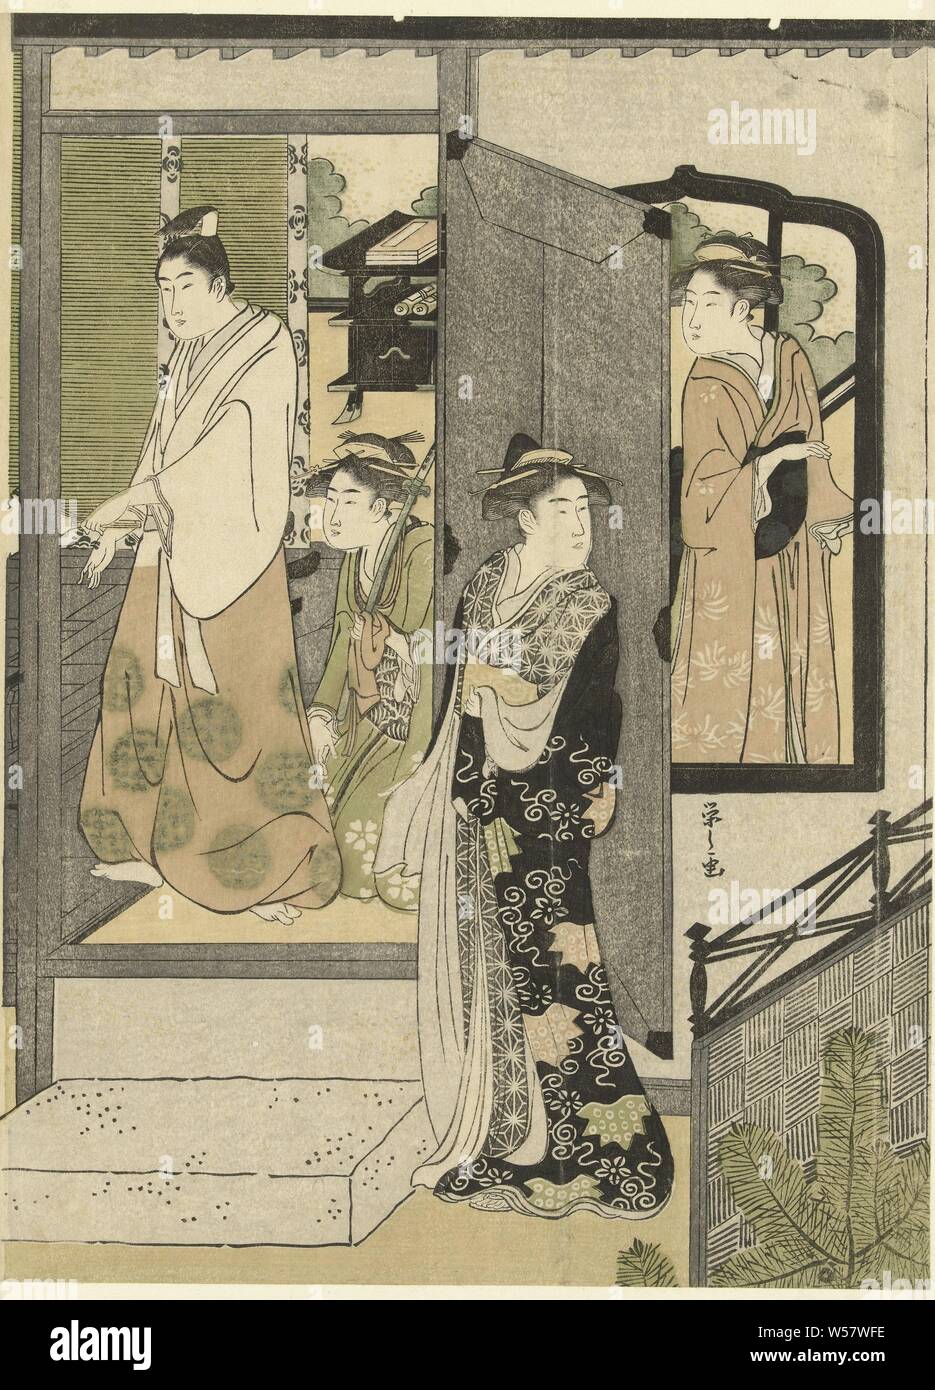 The visit, Woman standing with the door open, behind which second woman looking at nobleman and kneeling maid with sword., Hosoda Eishi (mentioned on object), 1788 - 1792, paper, colour woodcut, h 347 mm × w 258 mm Stock Photo